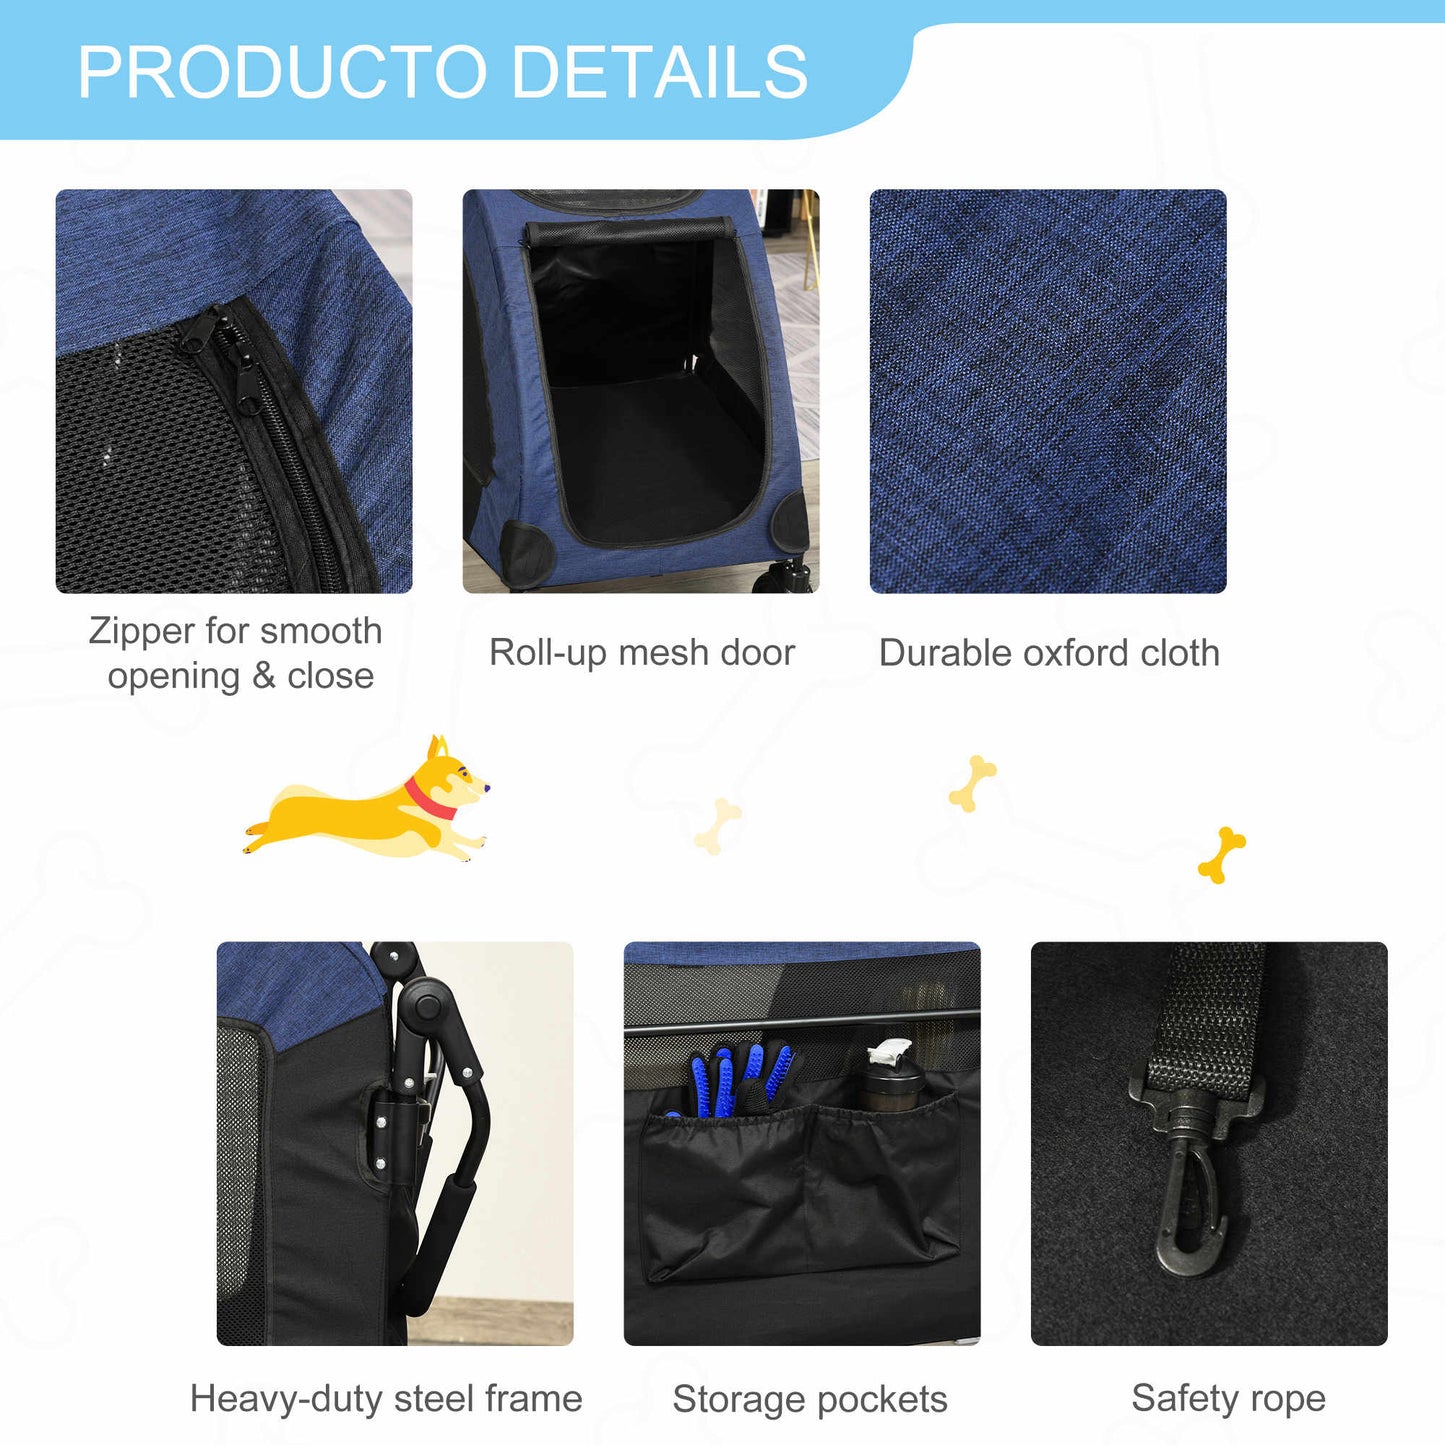 Pet Supplies-Pet Stroller, Dog Bike Trailer Cargo Cart with Universal Wheel, Storage Pocket & Ventilated Foldable Fabric for Medium or Large Size Dogs, Blue - Outdoor Style Company